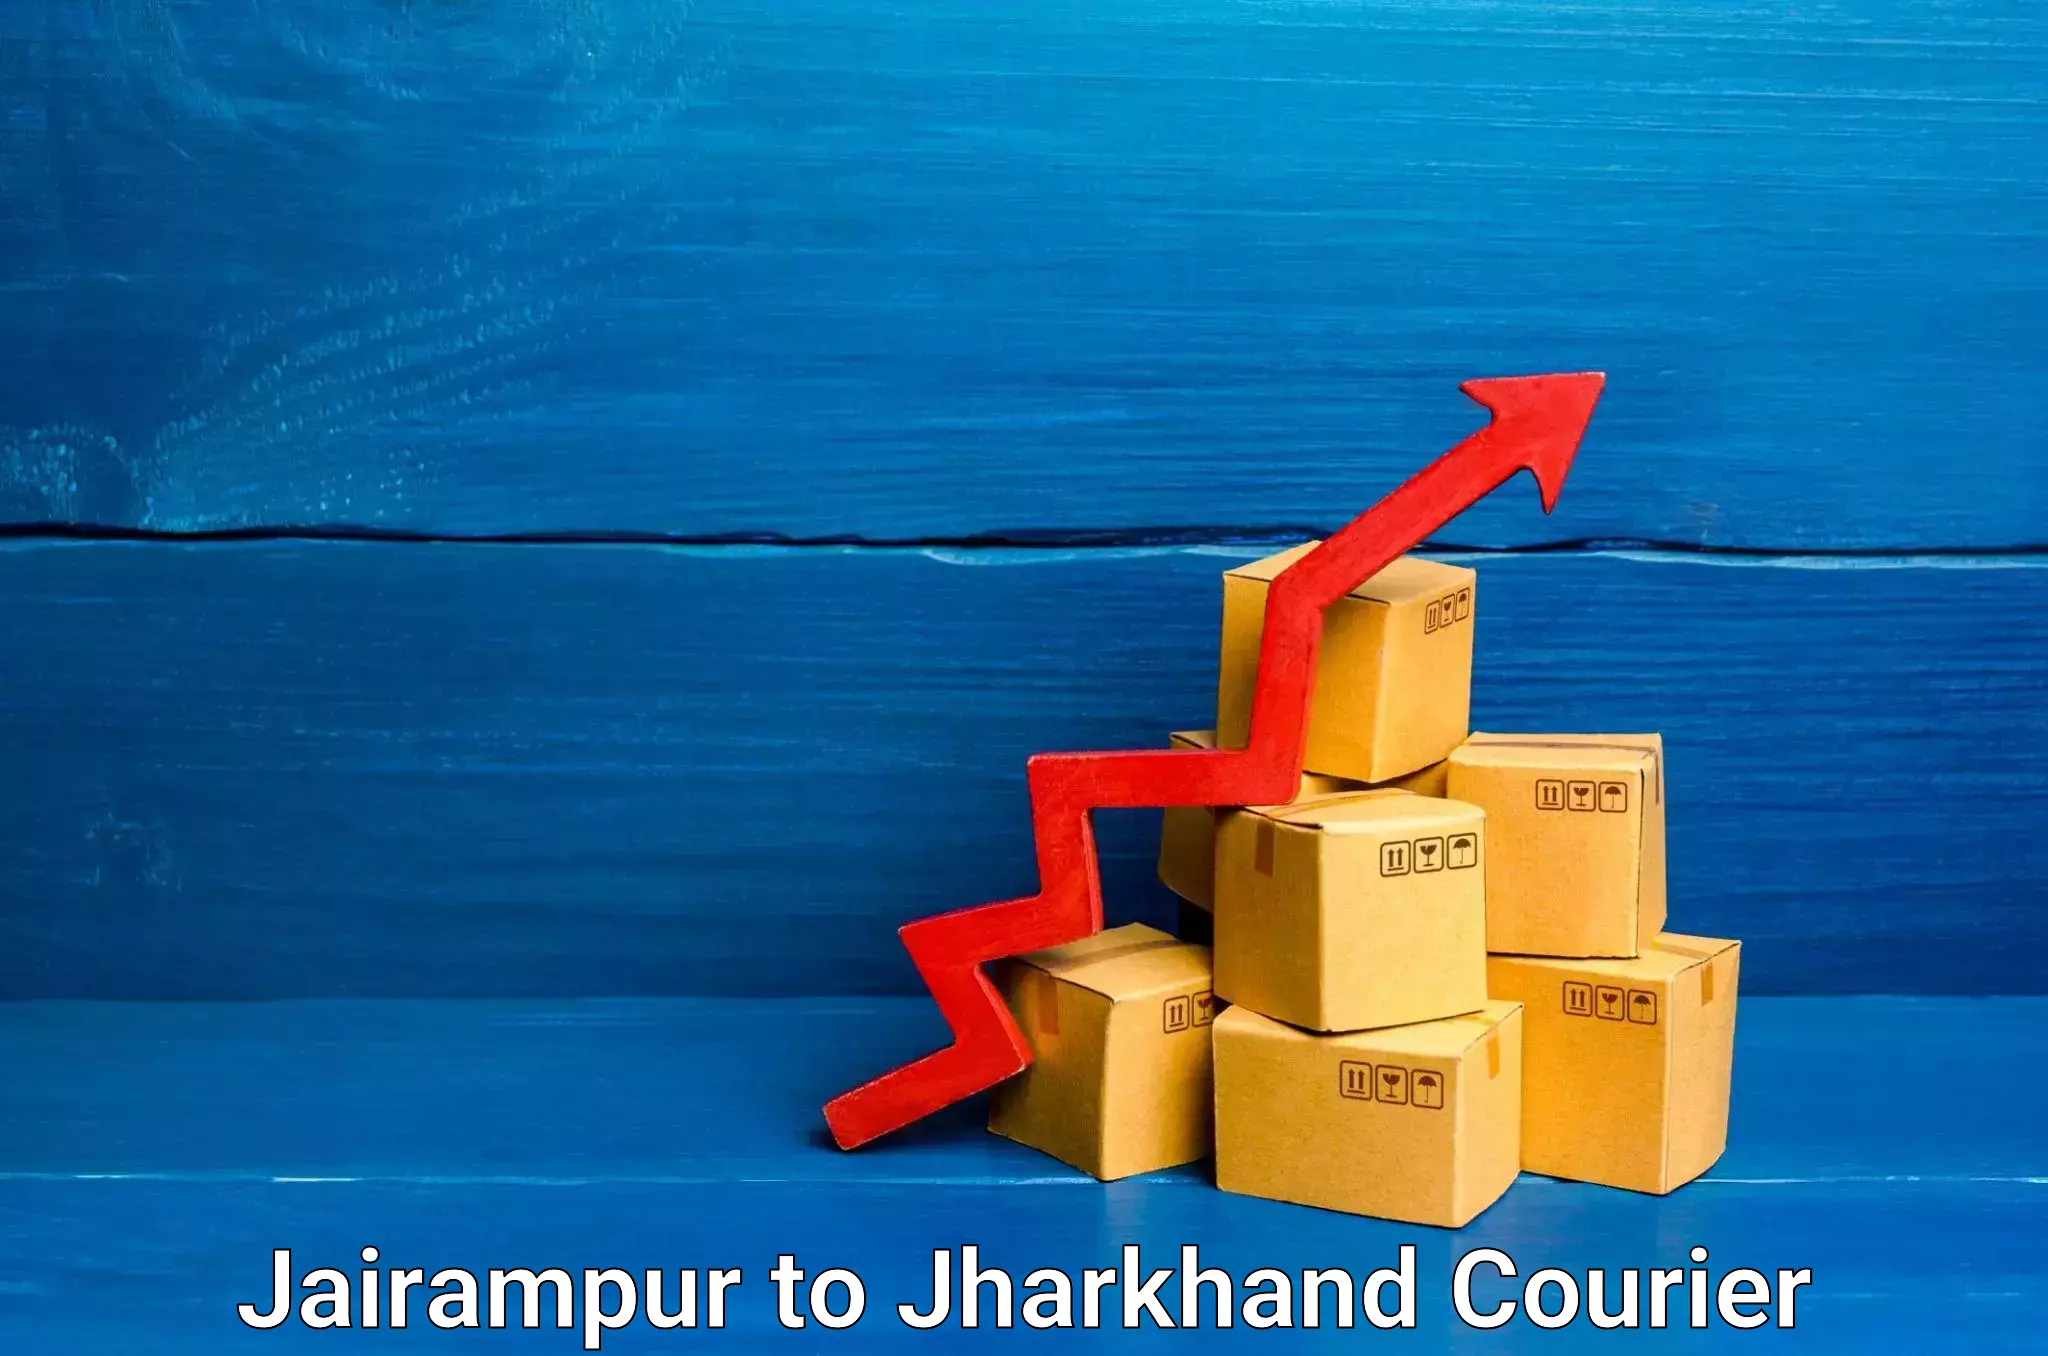 Reliable delivery network Jairampur to Ramgarh